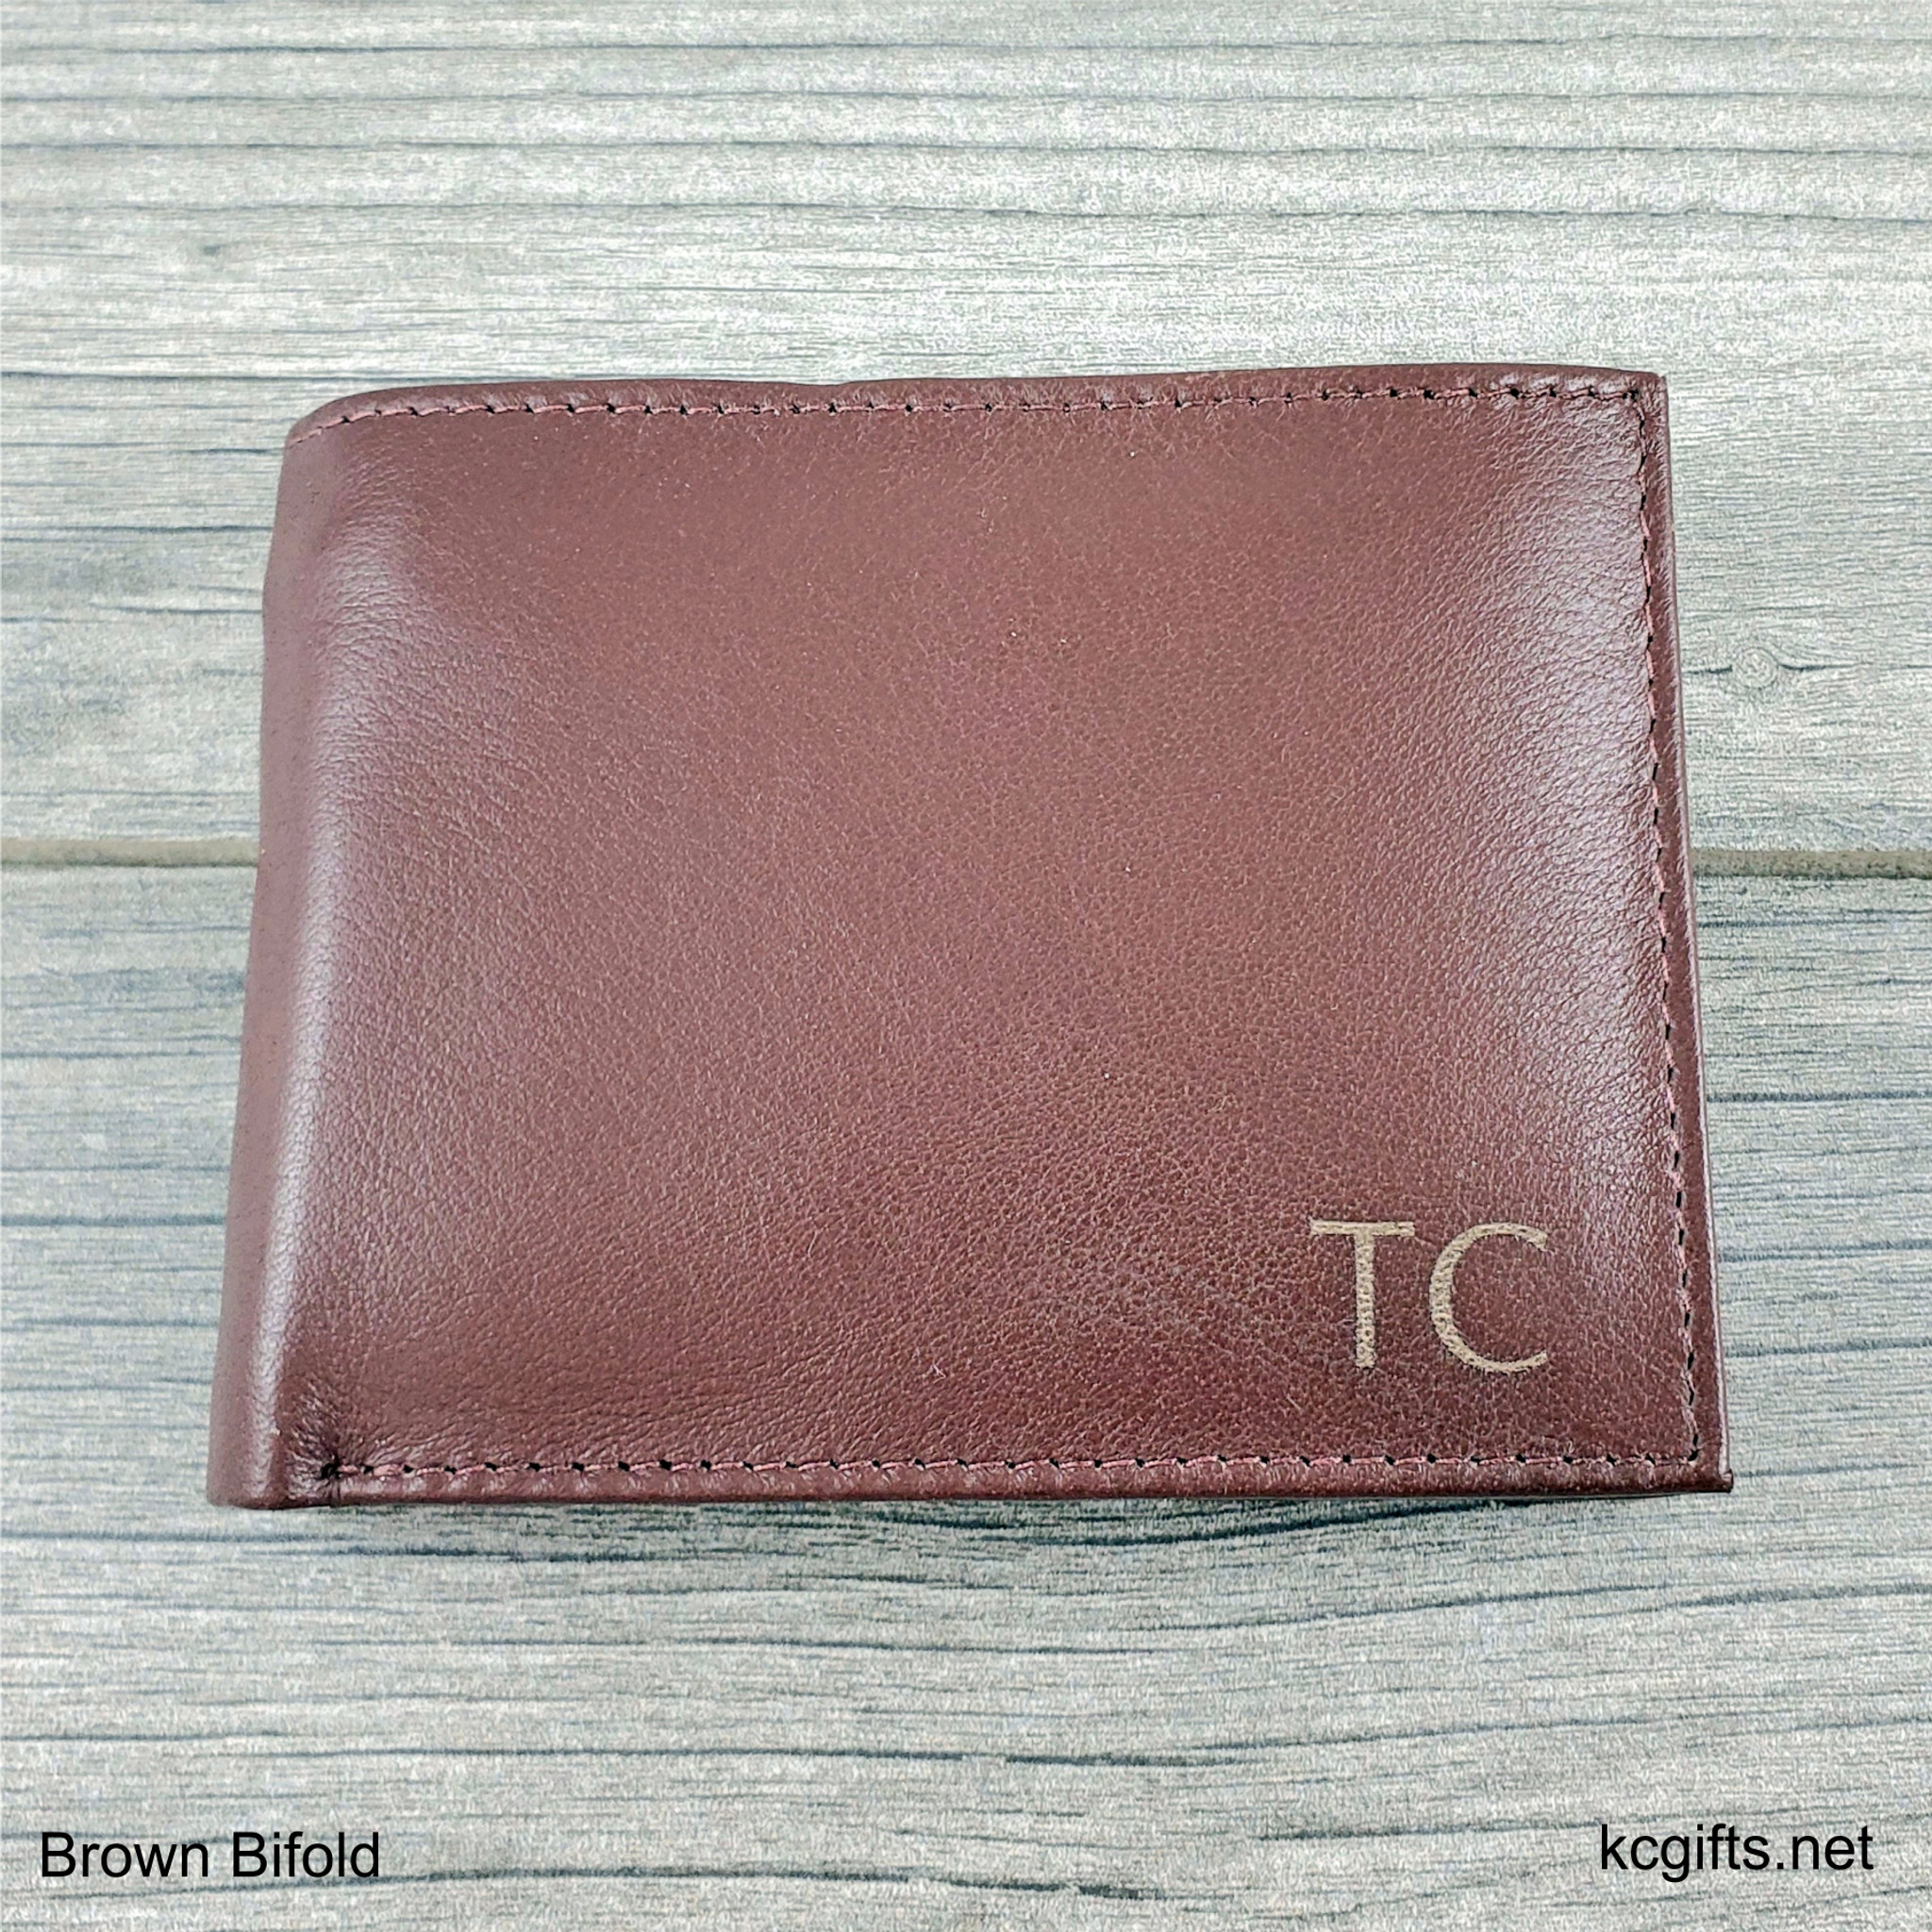 Personalized Wallet Bifold Brown Real Leather Wallet 